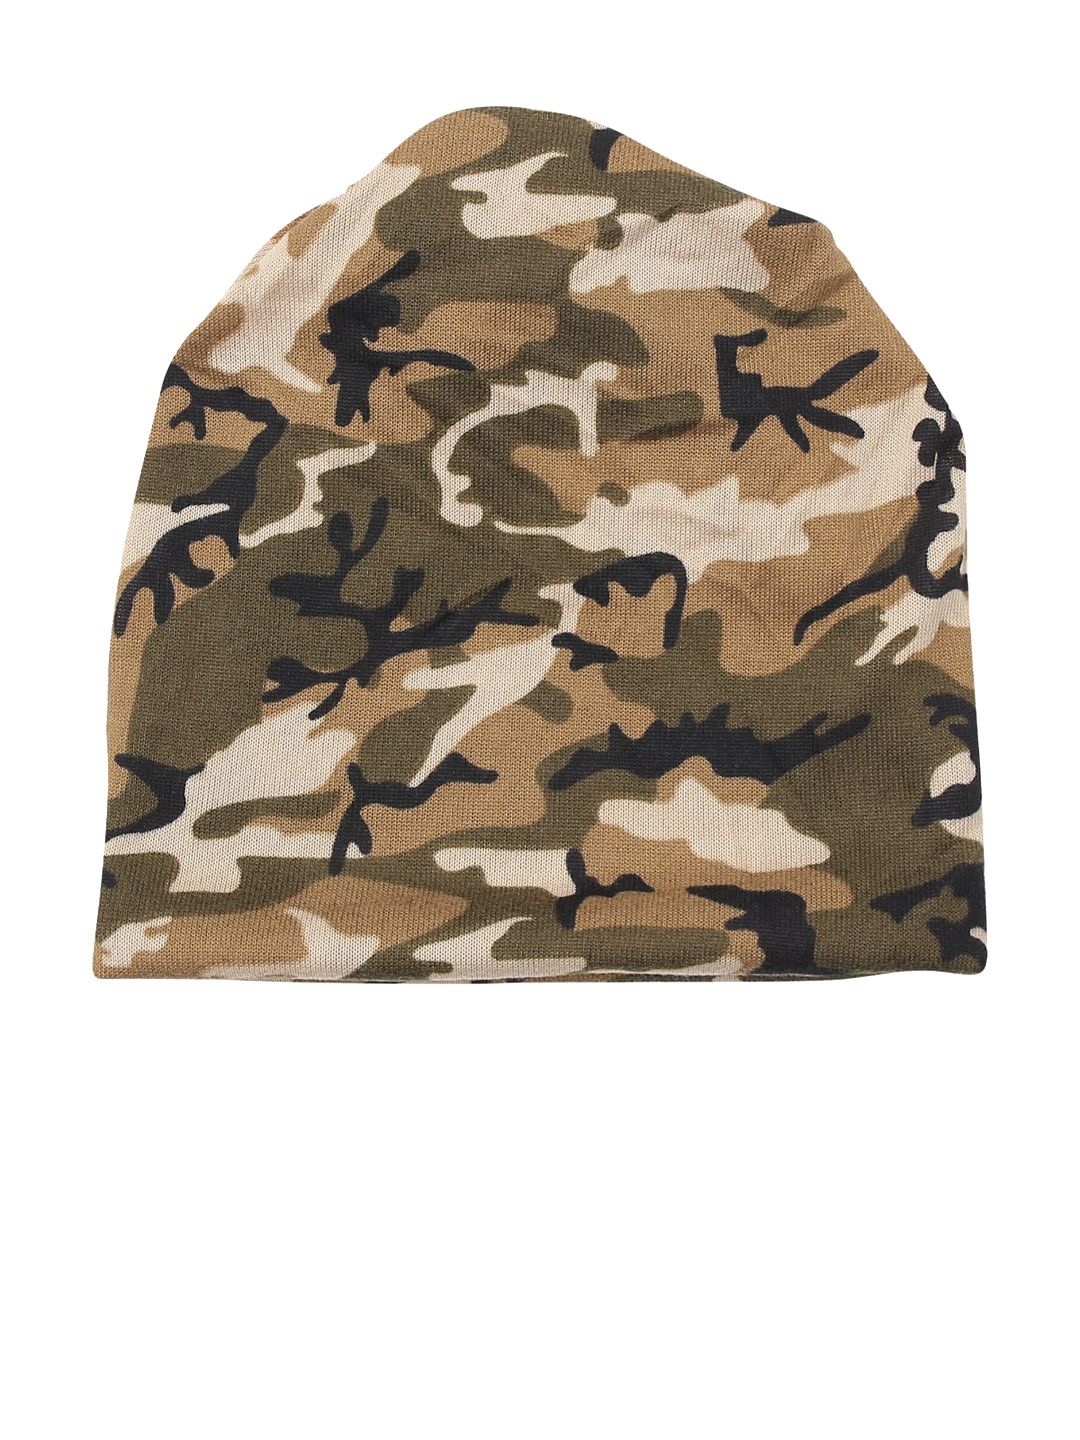 iSWEVEN Unisex Multi Caps Printed Slouchy Beanie and Skull Cap Price in India